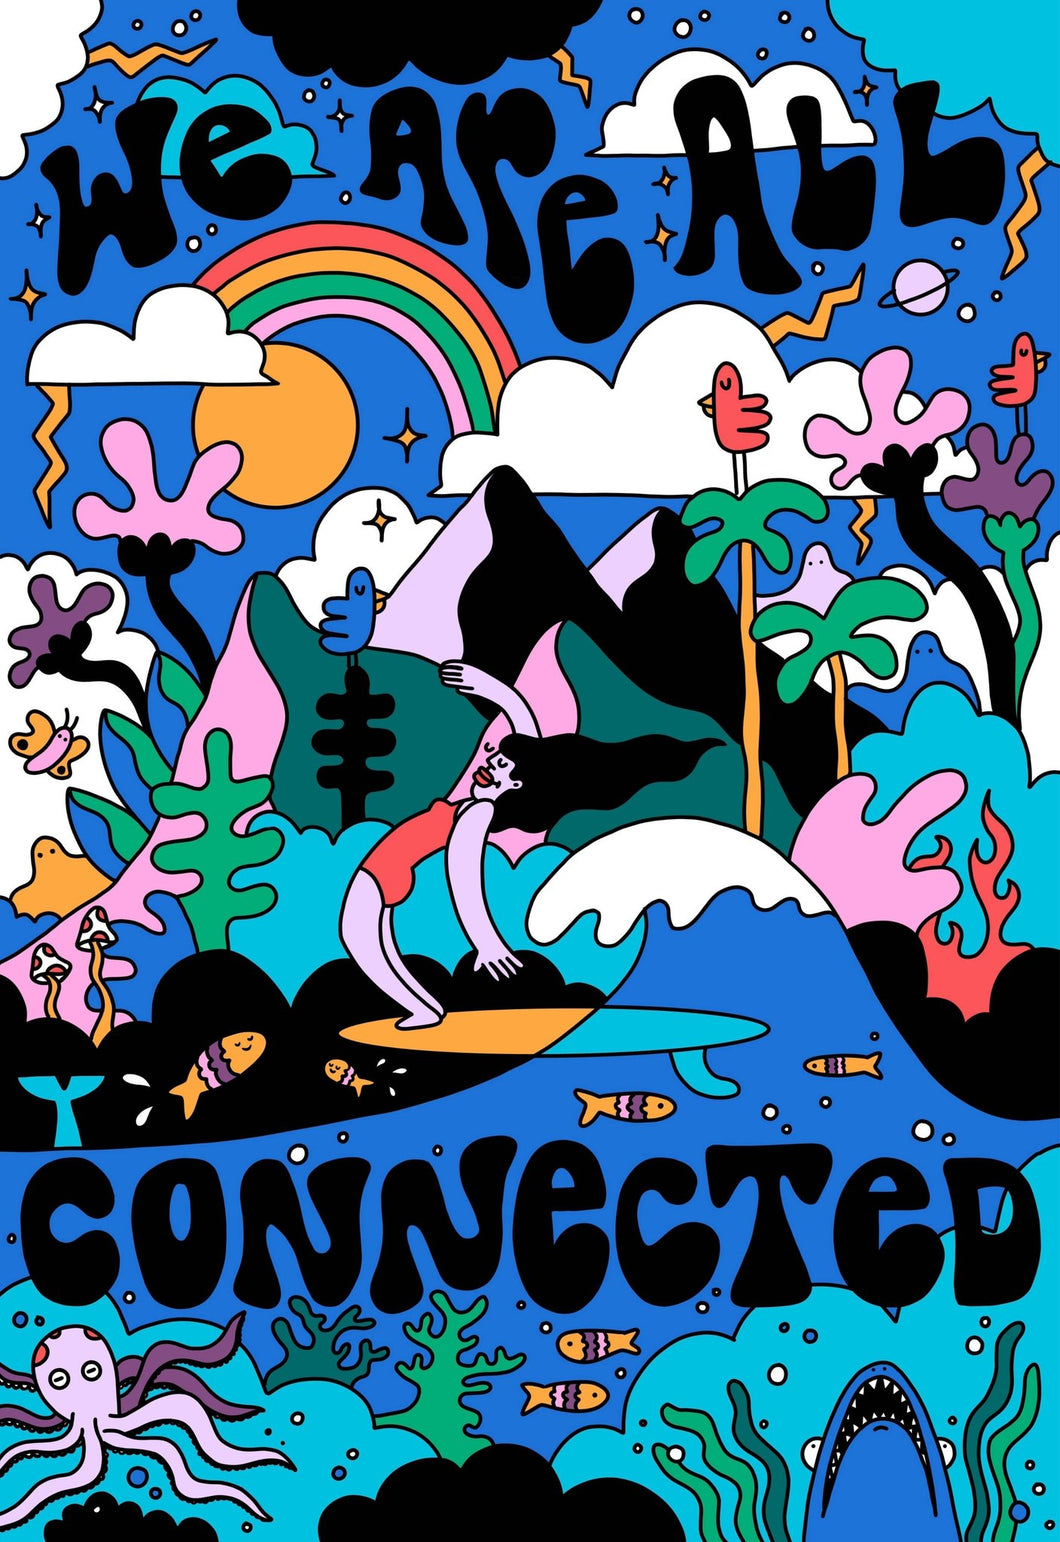 【Surf Shack Puzzles】 ジグソーパズル”We Are All Connected” by Hannah Eddy